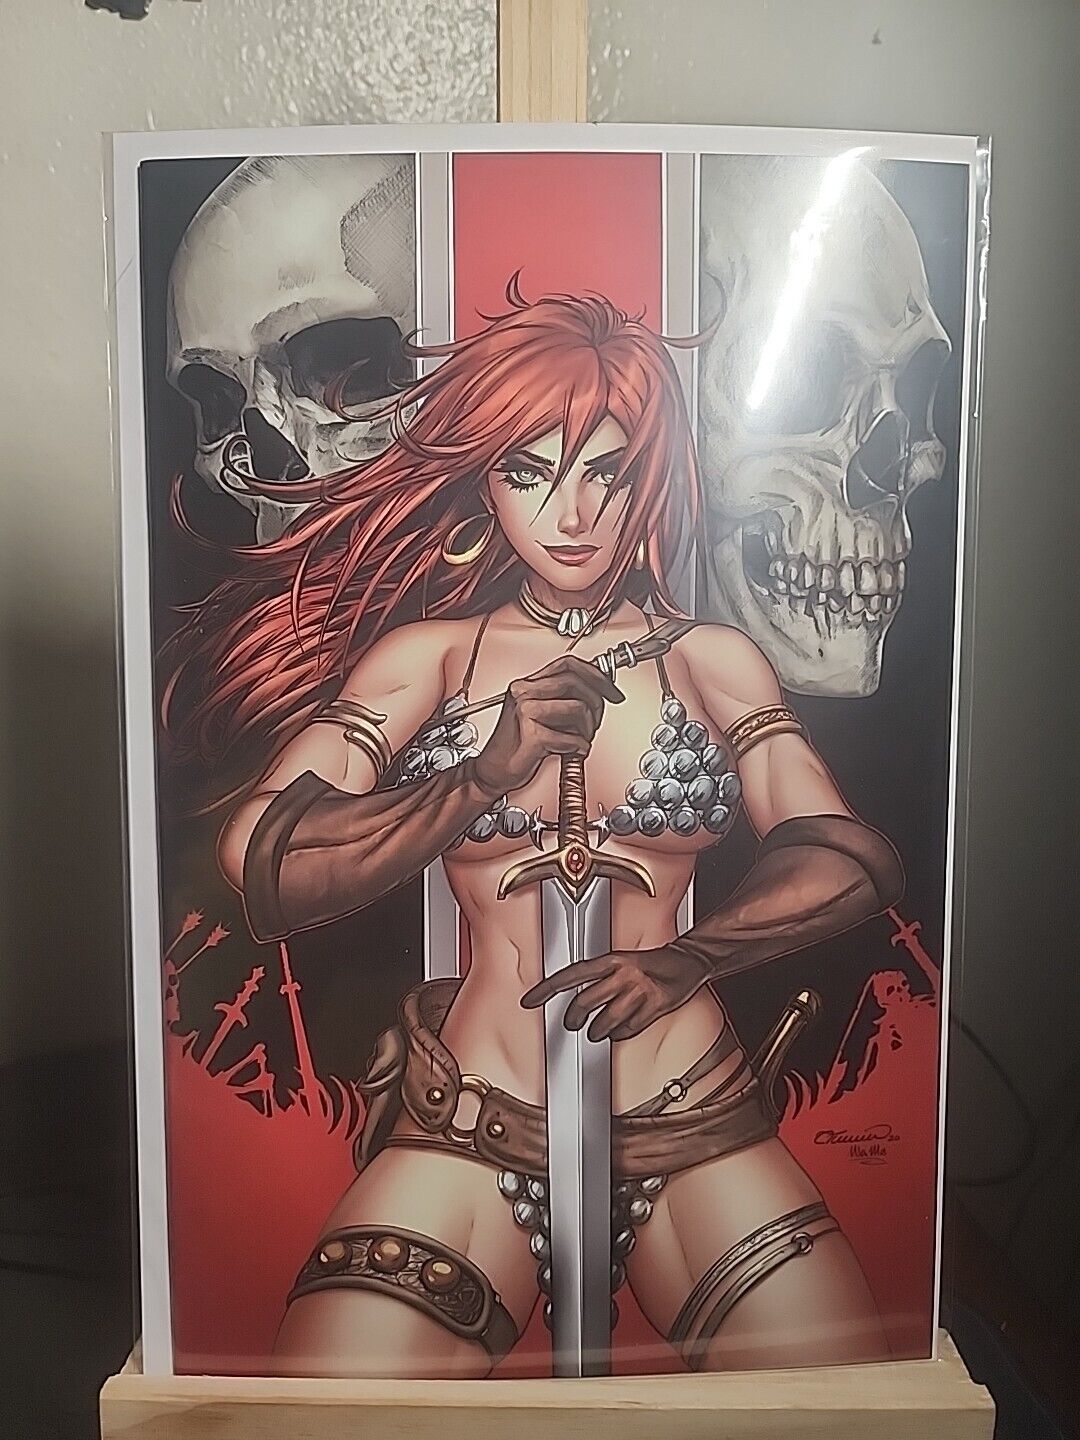 RED SONJA PRINCE OF BLOOD 1 COVER BY COLLETTE TURNER  VIRGIN VARIANT COVER 2020.